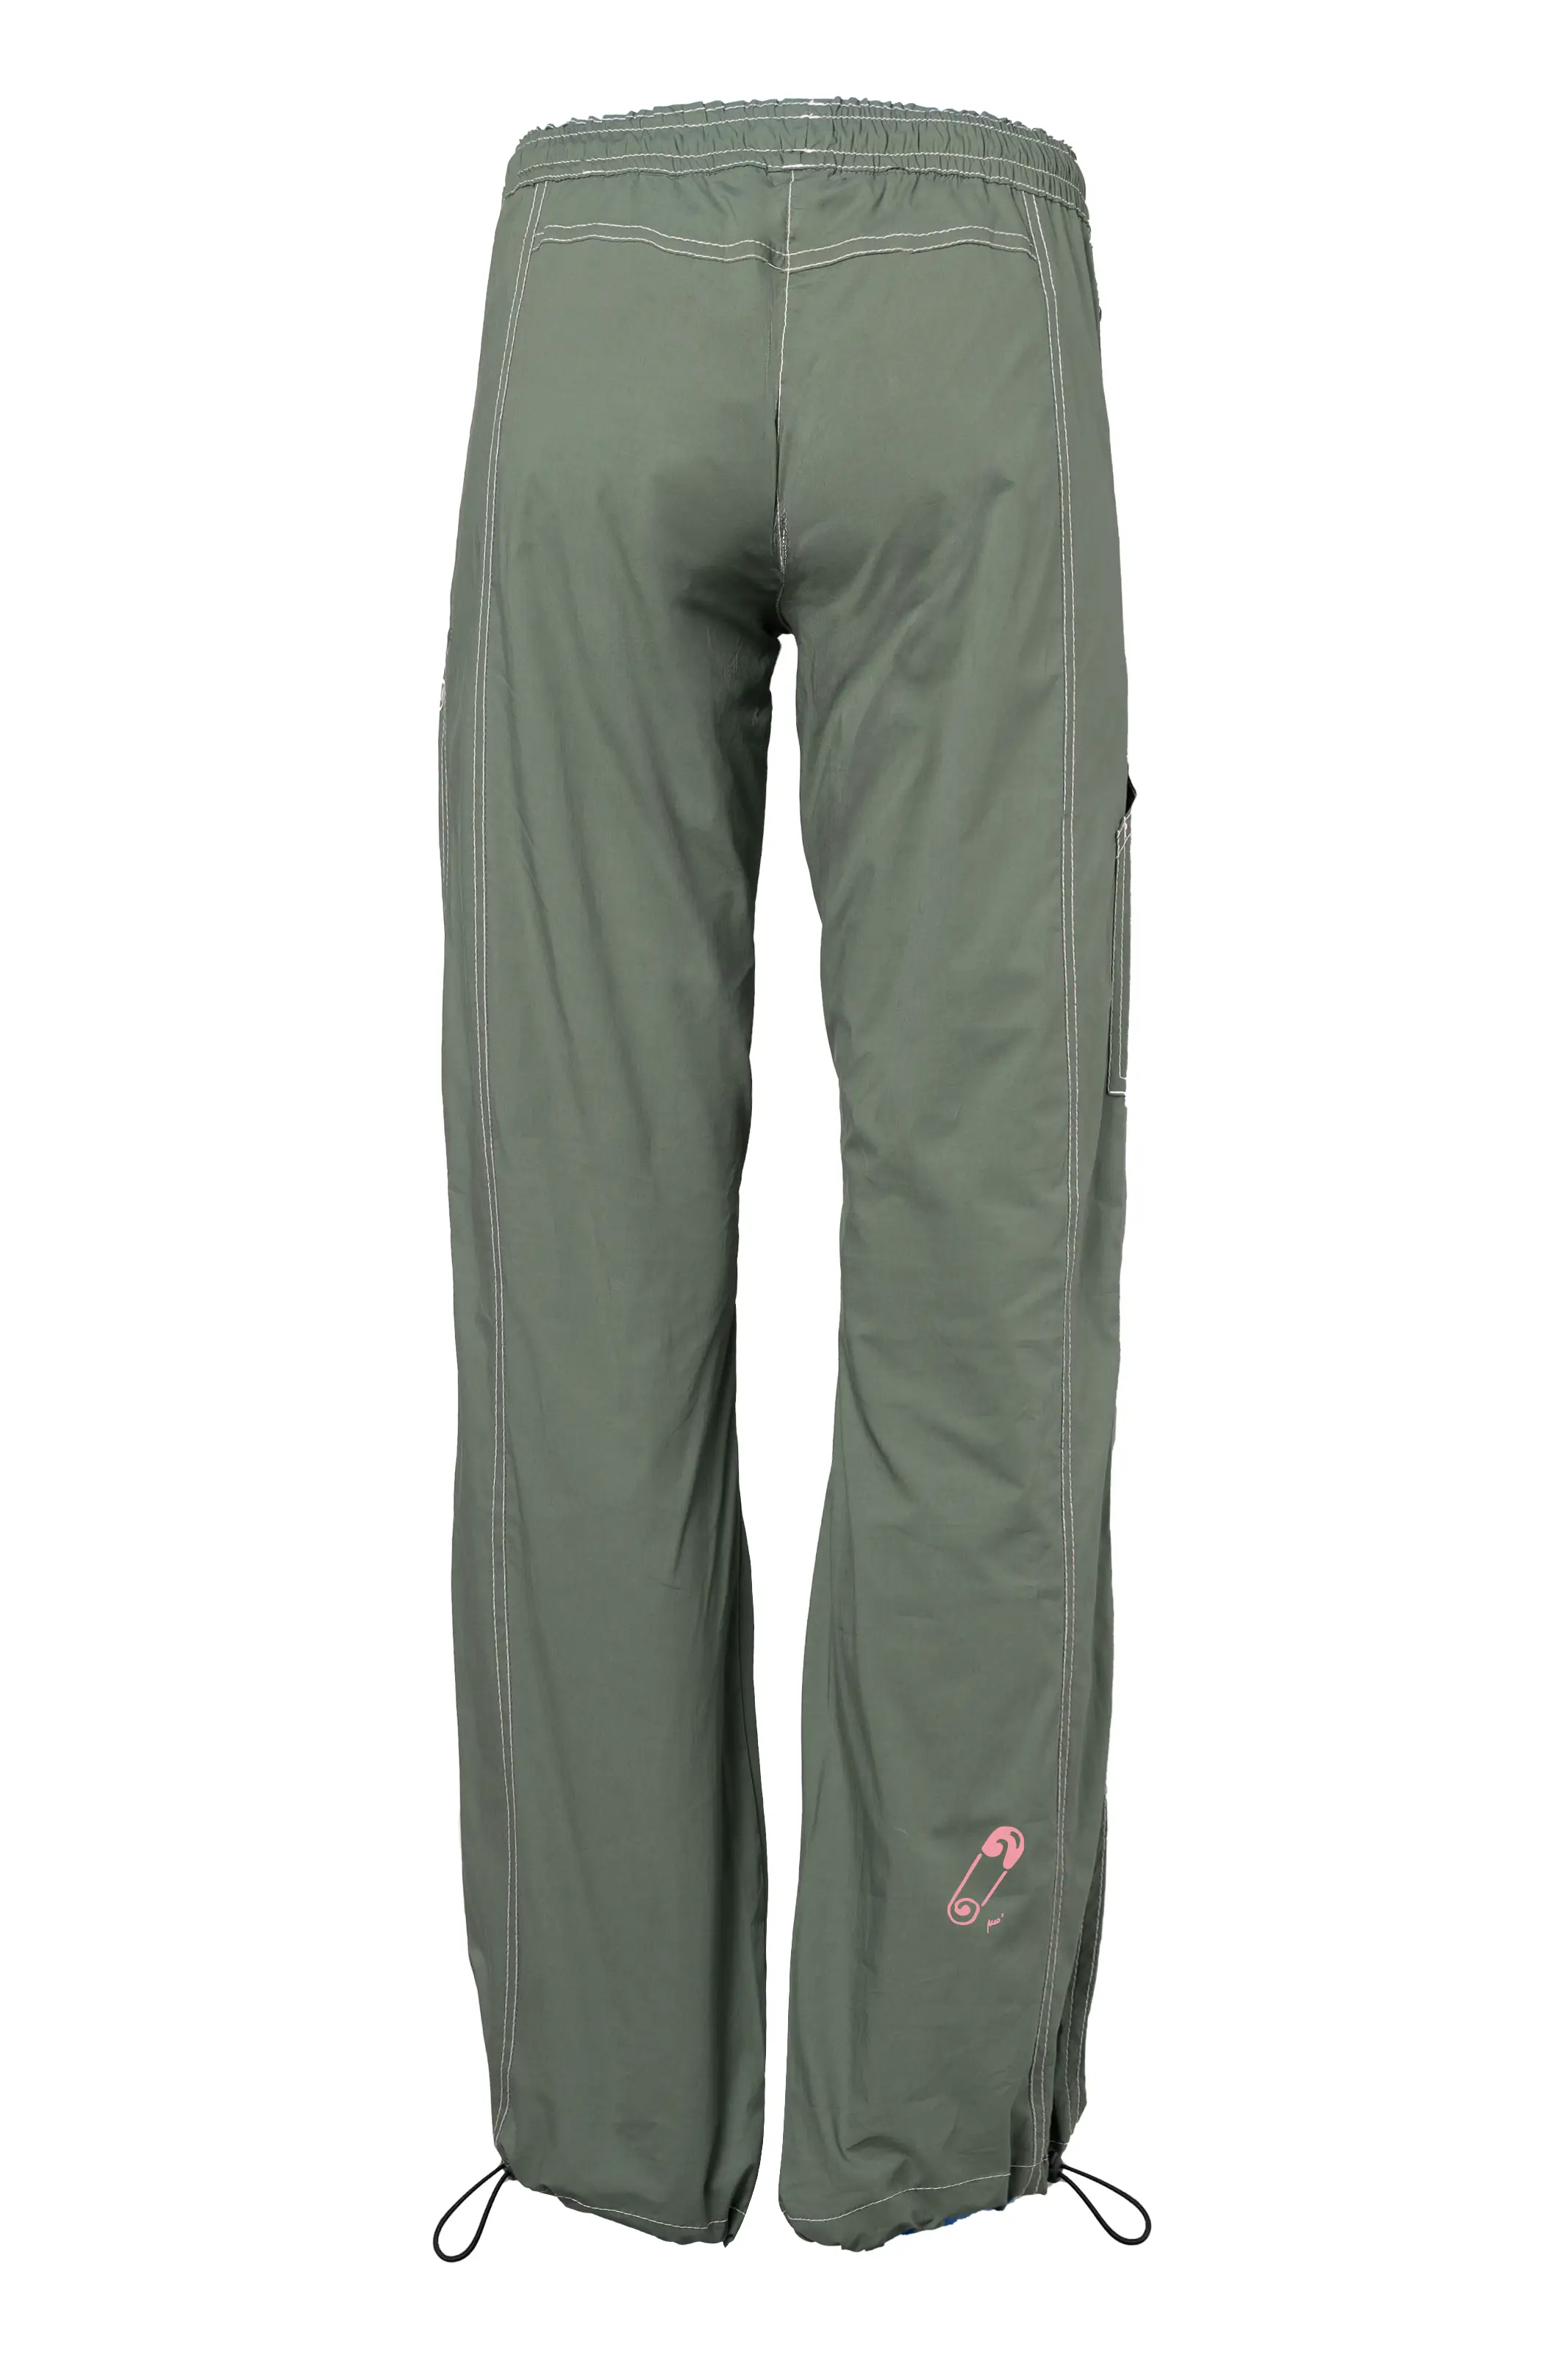 Pantalone arrampicata donna in velluto KATY ⋆ MONVIC ⋆ Made in Italy with ❤